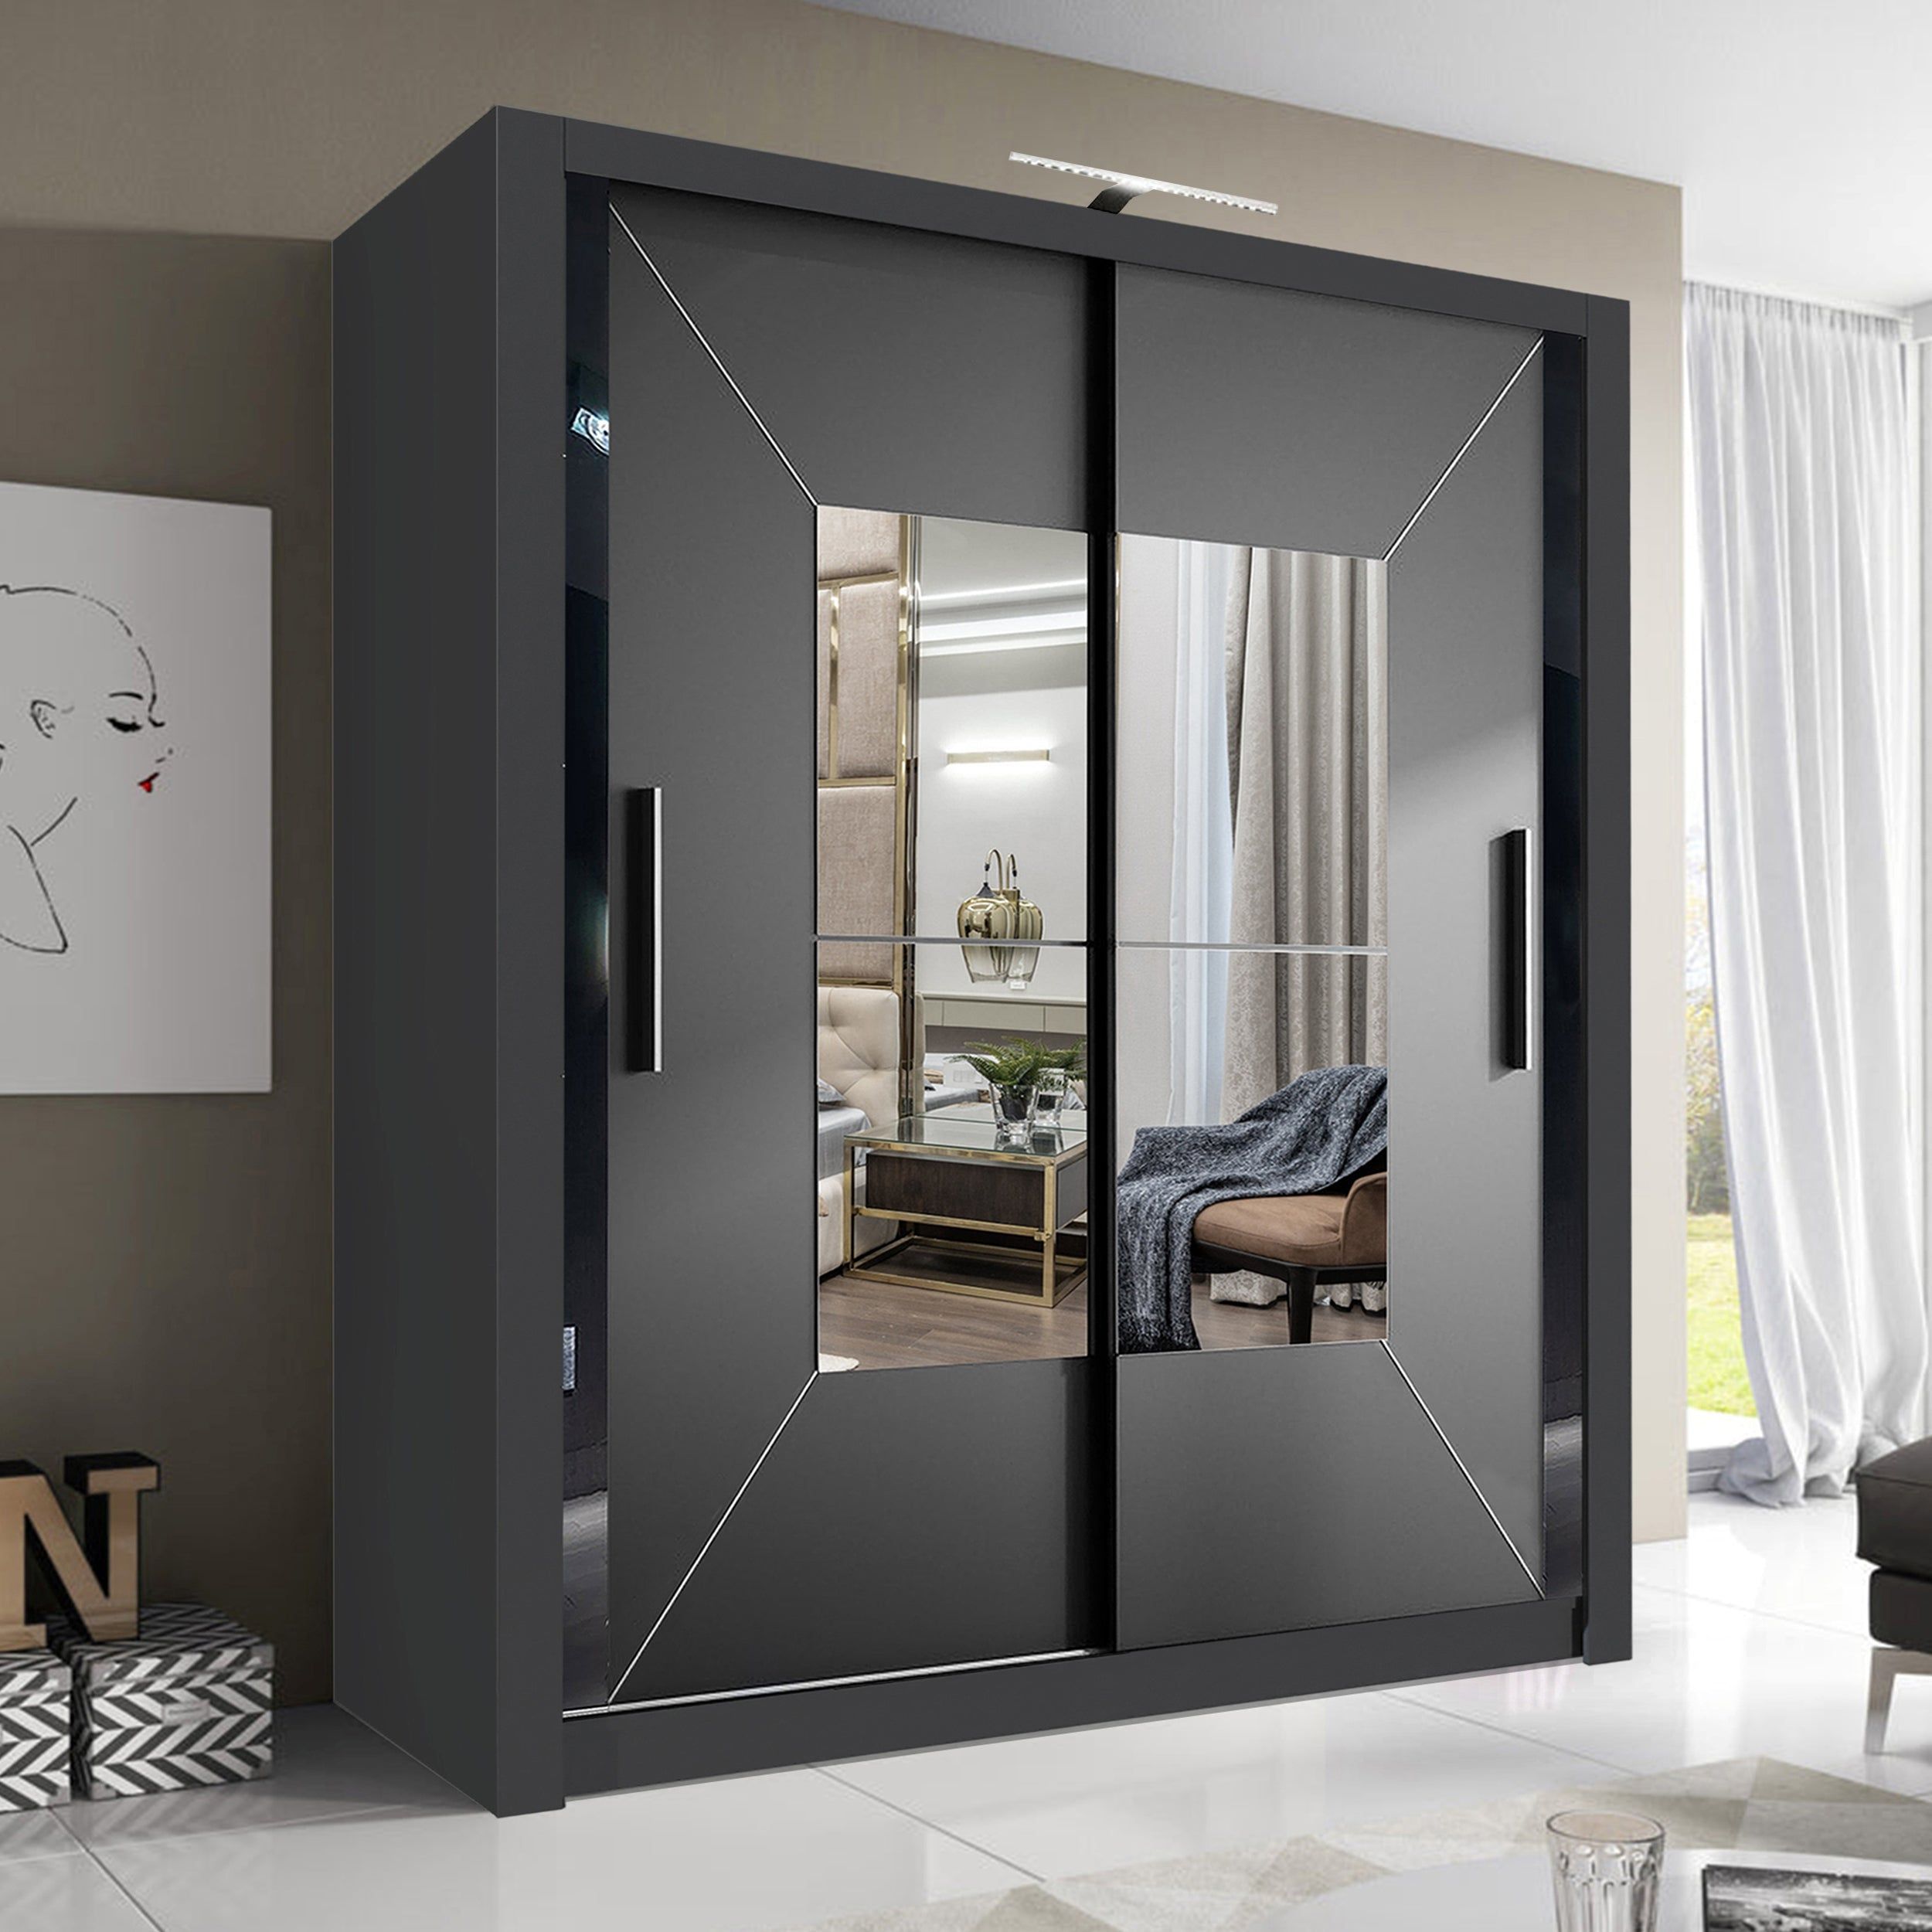 Blisswood Modern Sliding Mirrored Wardrobe, 203cm | Wardrobe Design  Bedroom, Wardrobe Interior Design, Sliding Door Wardrobe Designs Regarding Black Wardrobes With Mirror (View 14 of 15)